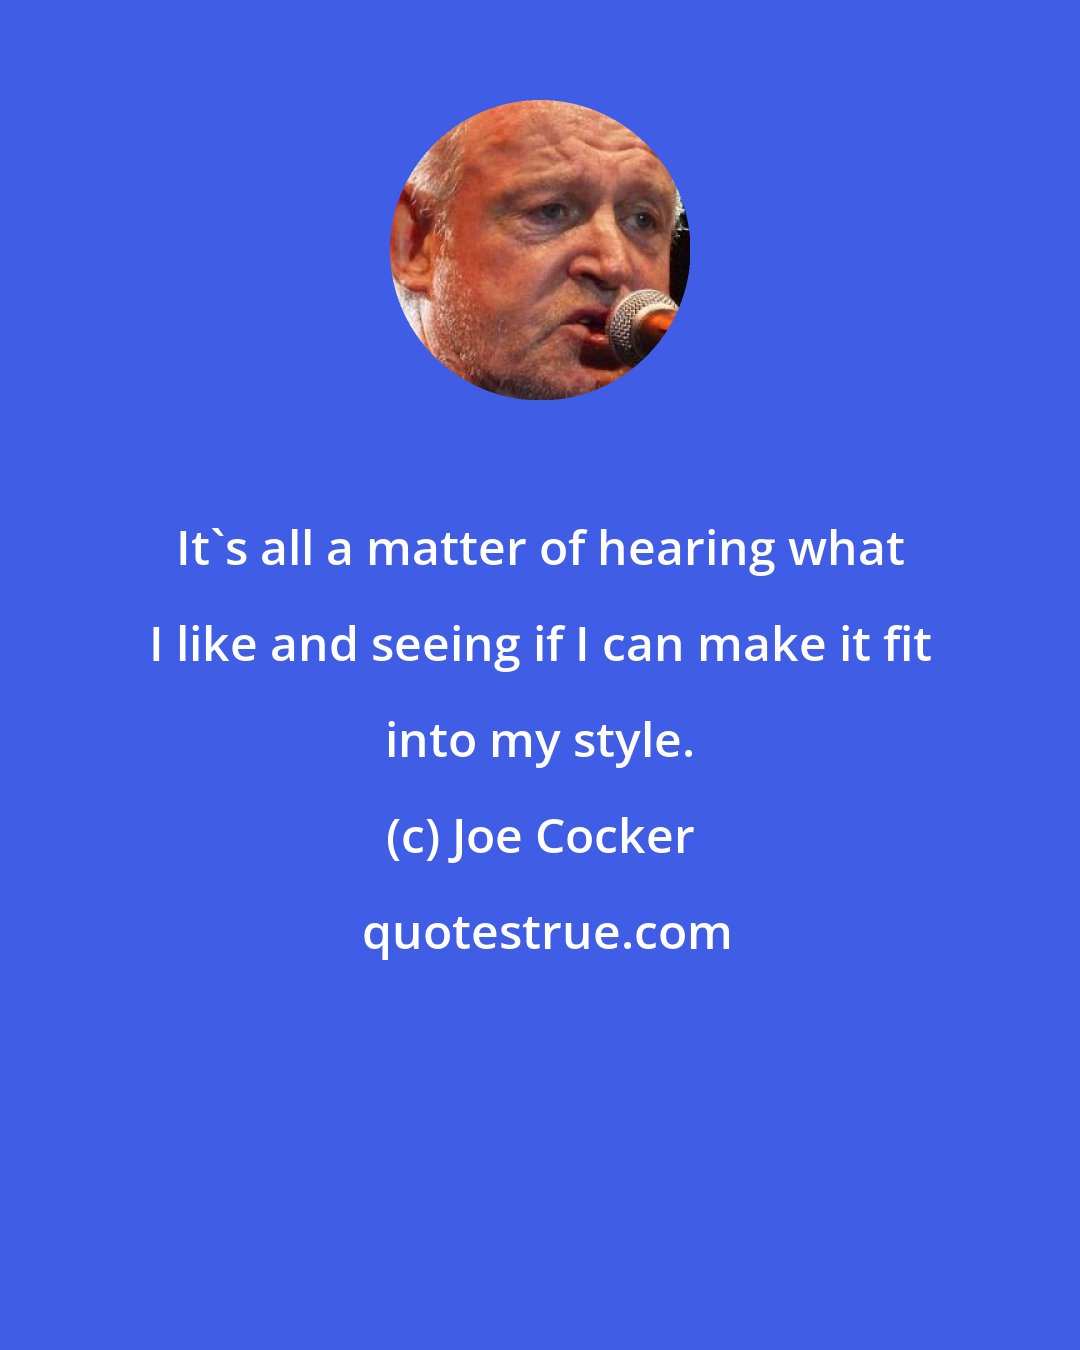 Joe Cocker: It's all a matter of hearing what I like and seeing if I can make it fit into my style.